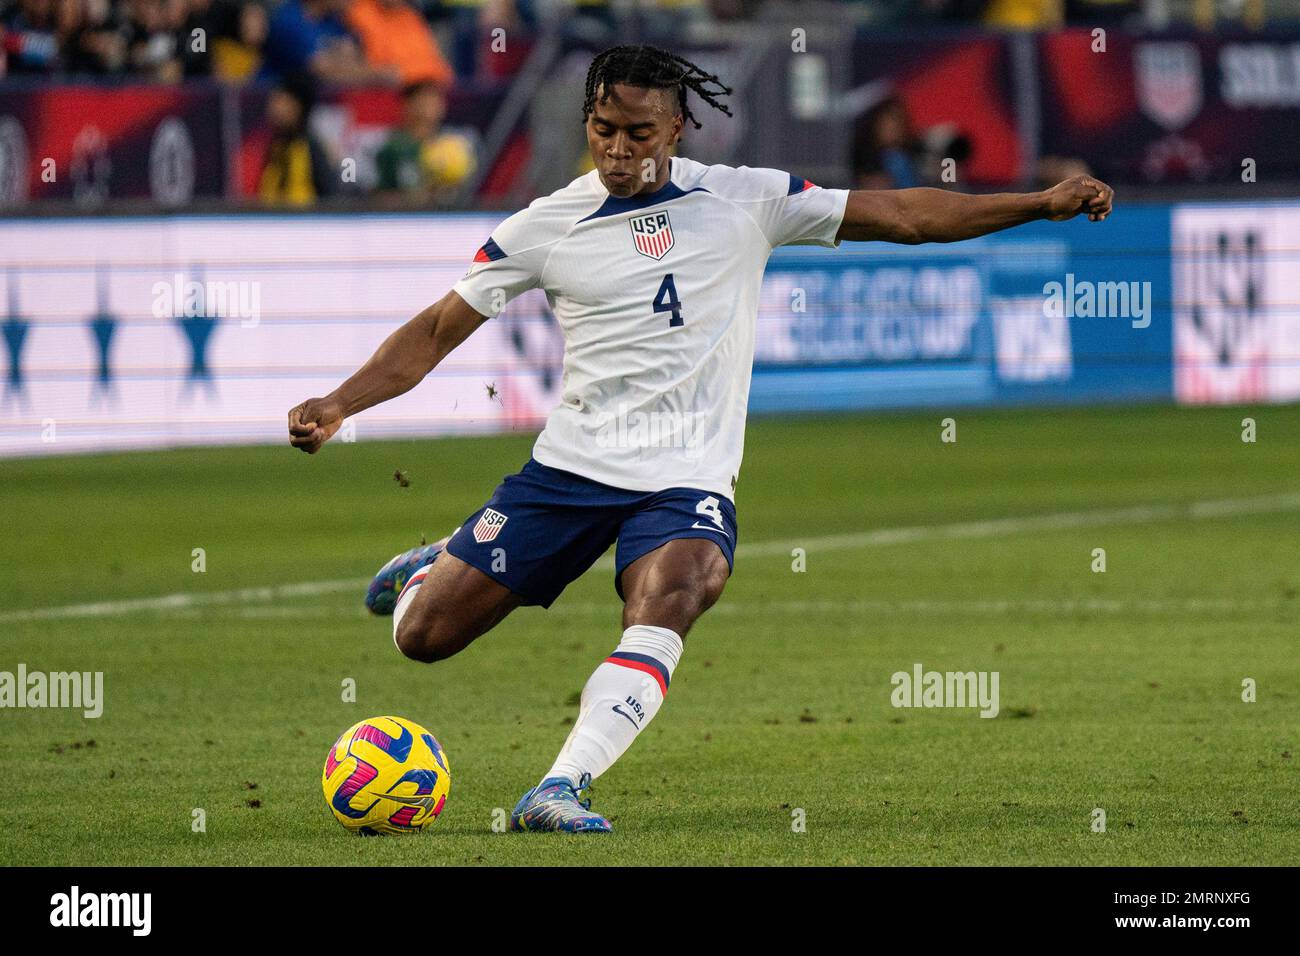 United States of America defender DeJuan Jones (4) sends a pass during an international friendly match against the Colombia, Saturday, January 28, 202 Stock Photo